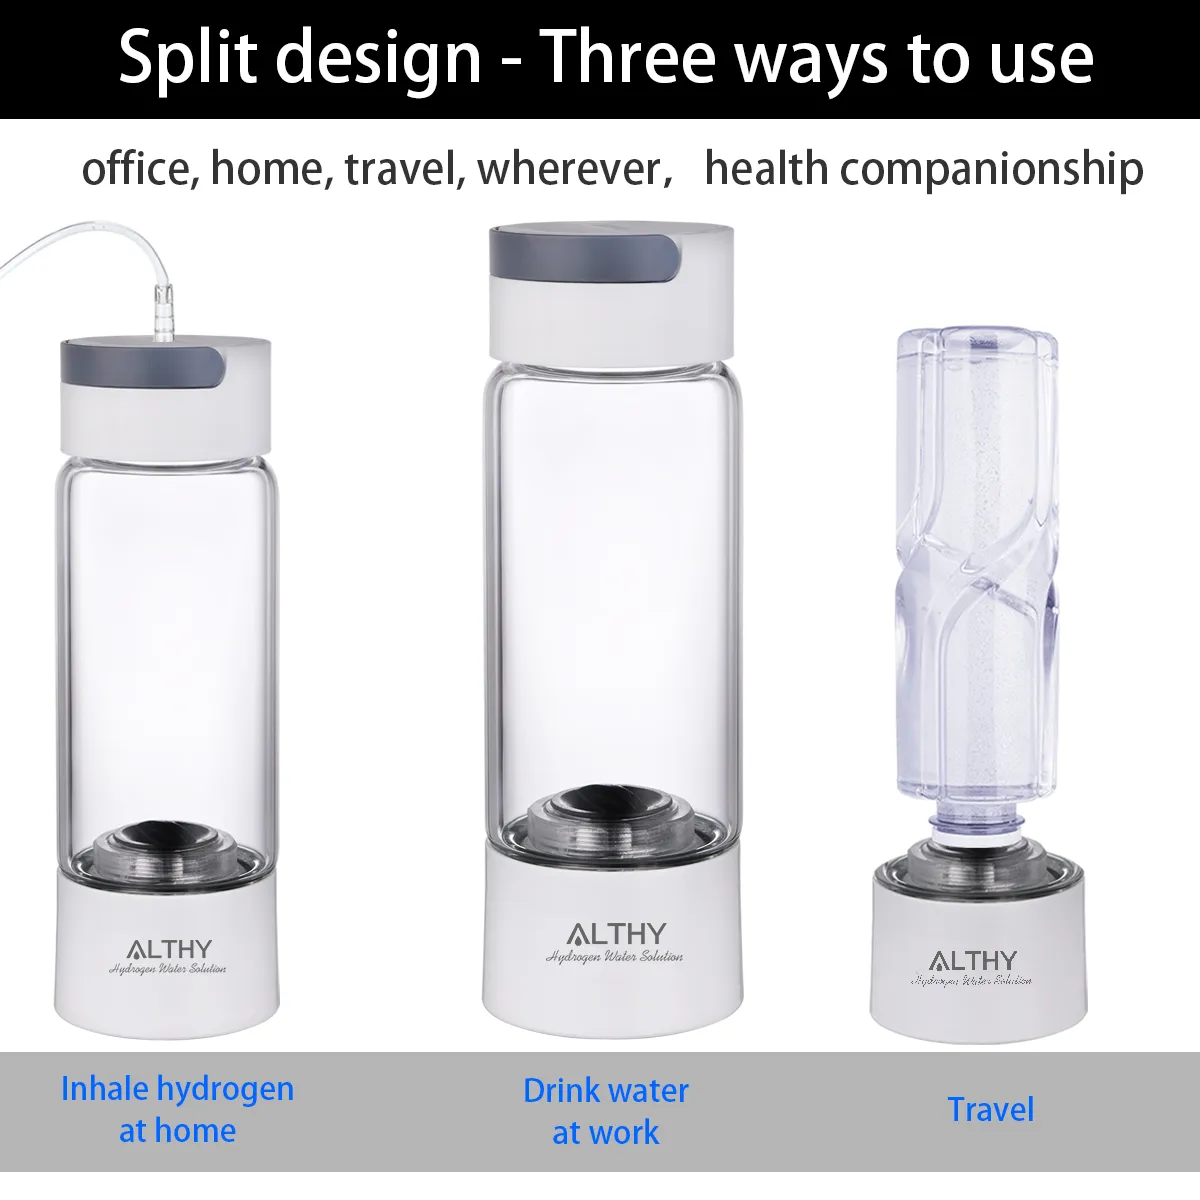 ALTHY Hydrogen Rich Water Generator Bottle - Glass Cupbody - DuPont SPE & PEM Dual Chamber Maker Ionizer - H2 Inhalation Device